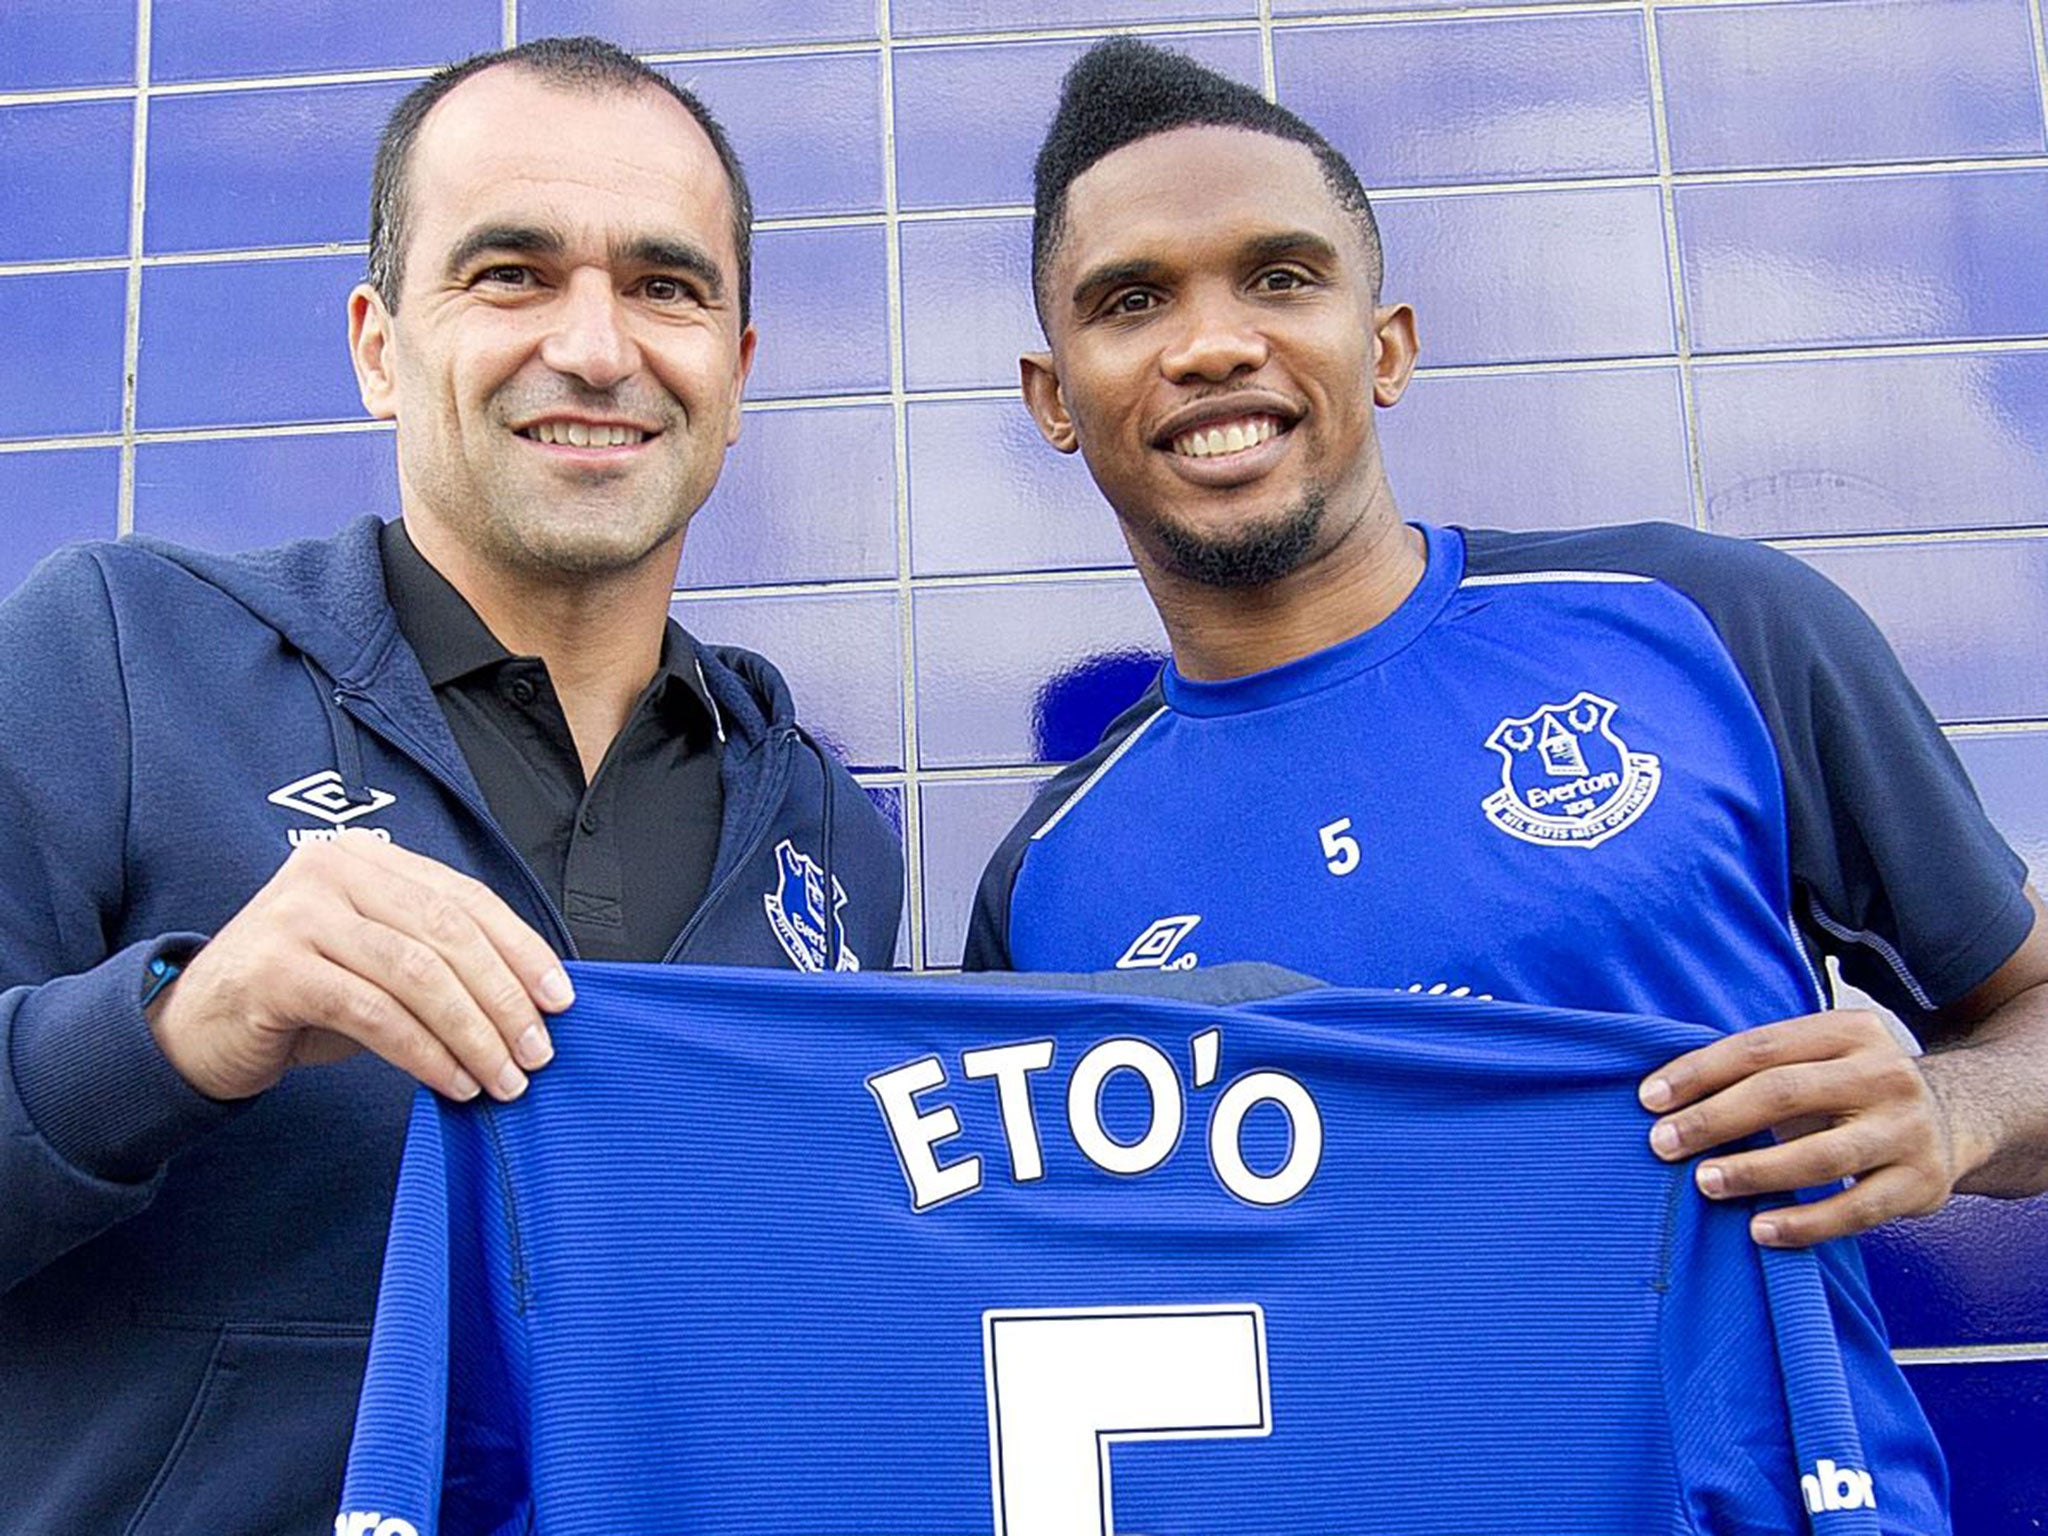 Eto'o came to Everton on a free transfer after scoring nine goals for Chelsea in the Premier League last season